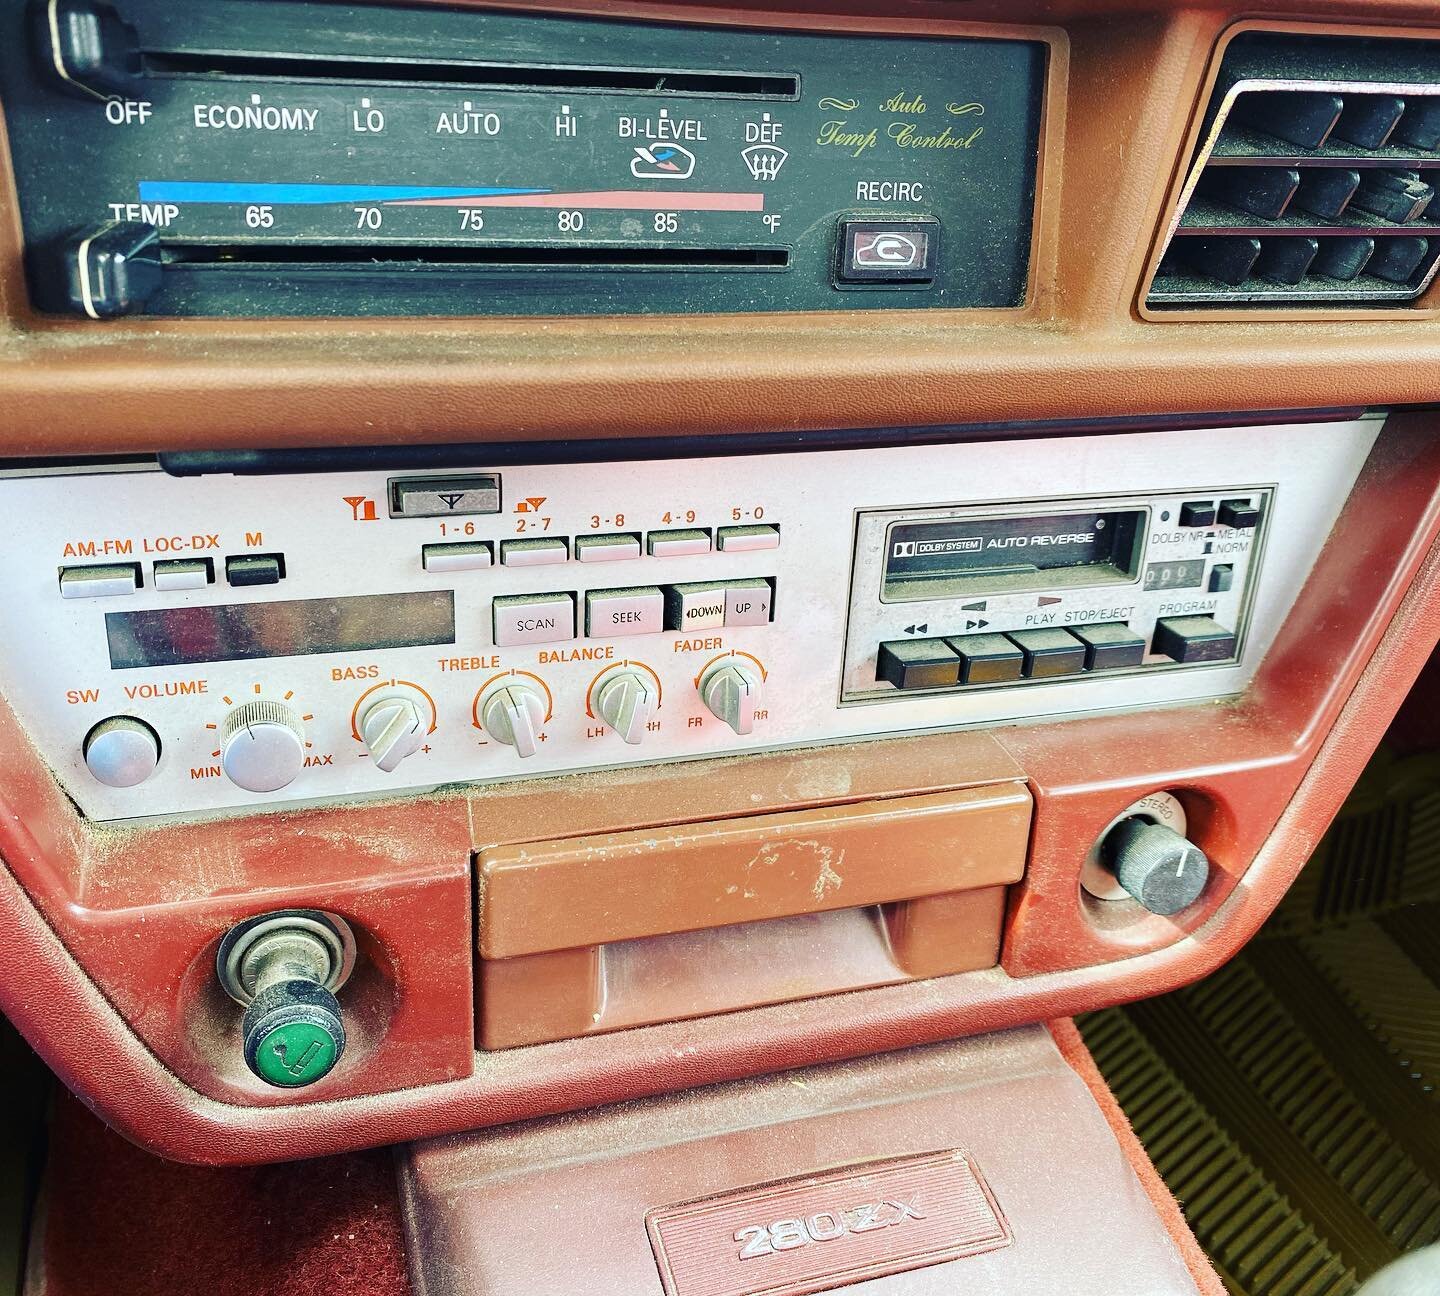 My Dad drove me to my first job in this car, and I remember staring at this car stereo system as he blasted whatever we were listening to. The lower right knob gave you a sort of stereo surround experience. His hearing was great back then and he love